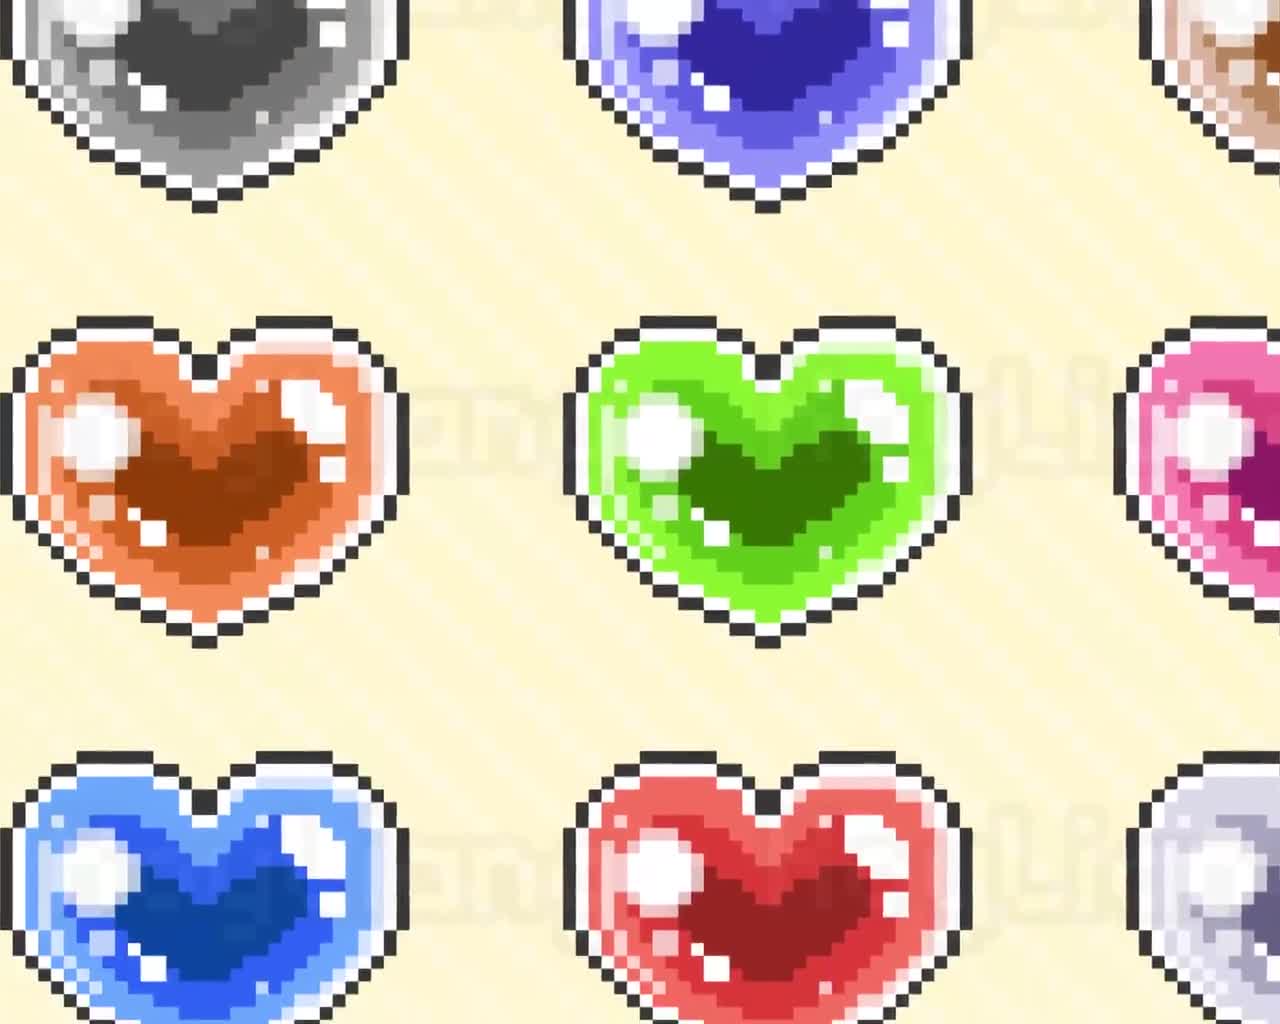 Cute Ghost Discord Role Icons 8-bit Pixel Emojis and Emotes 